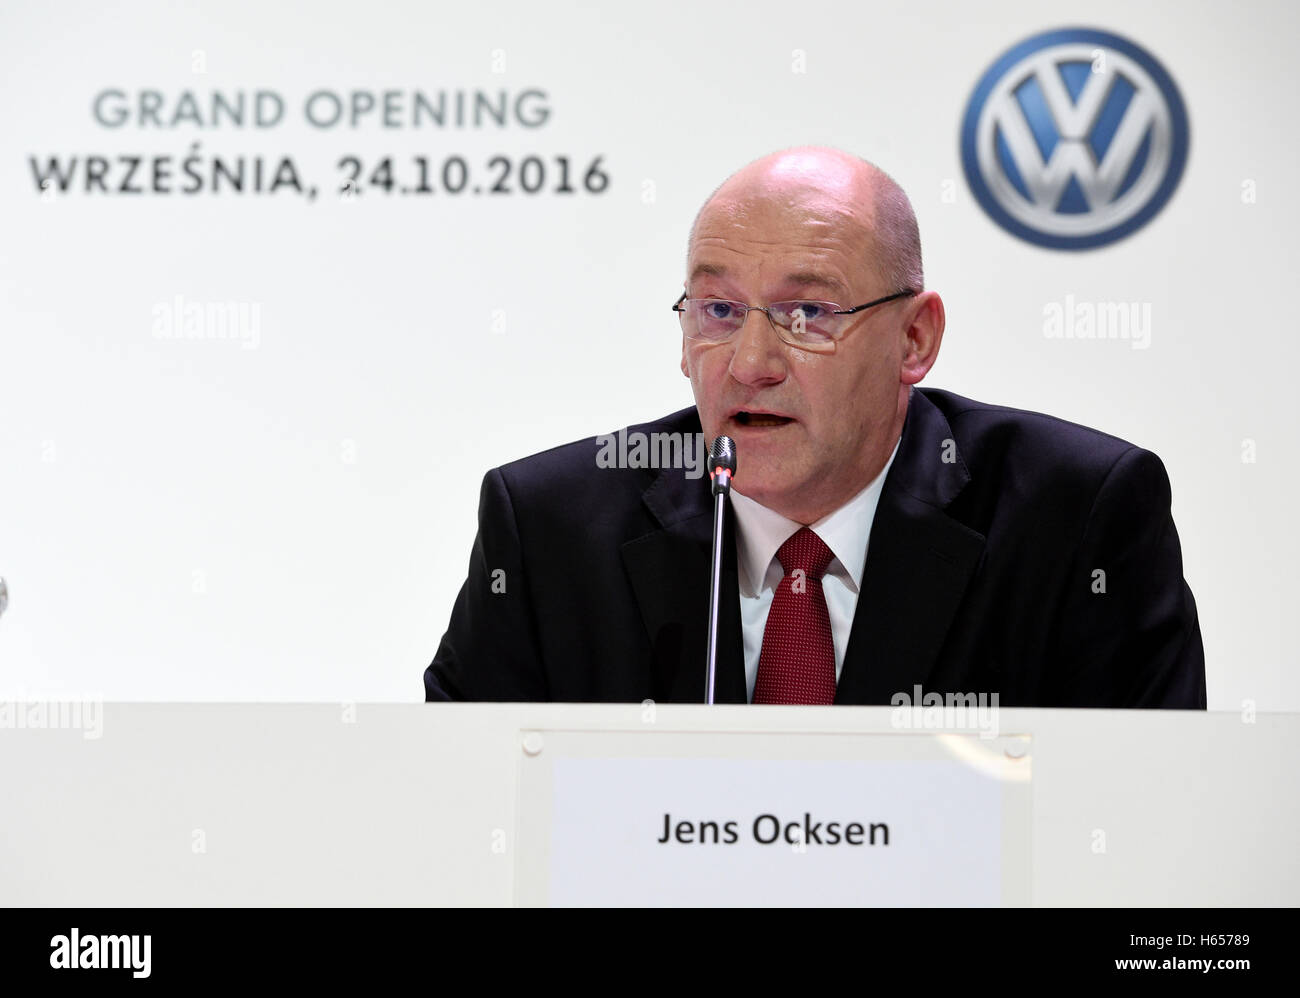 Wrzesnia, Poland. 24th Oct, 2016. Jens Ocksen, Chairman of Volkswagen Poznan and Member of the Executive Board of Volkswagen Commercial Vehicles, speaking during a press conference at the new Volkswagen Nutzfahrzeuge (Commercial Vehicles, VWN) factory in Wrzesnia, Poland, 24 October 2016. The factory was built in only two years. Volkswagen Commercial Vehicles invested roughly 800 million Euro in the 220 hectar area. Up to 3,000 employees are said to assemble the new Crafter at the factory. PHOTO: RAINER JENSEN/dpa/Alamy Live News Stock Photo